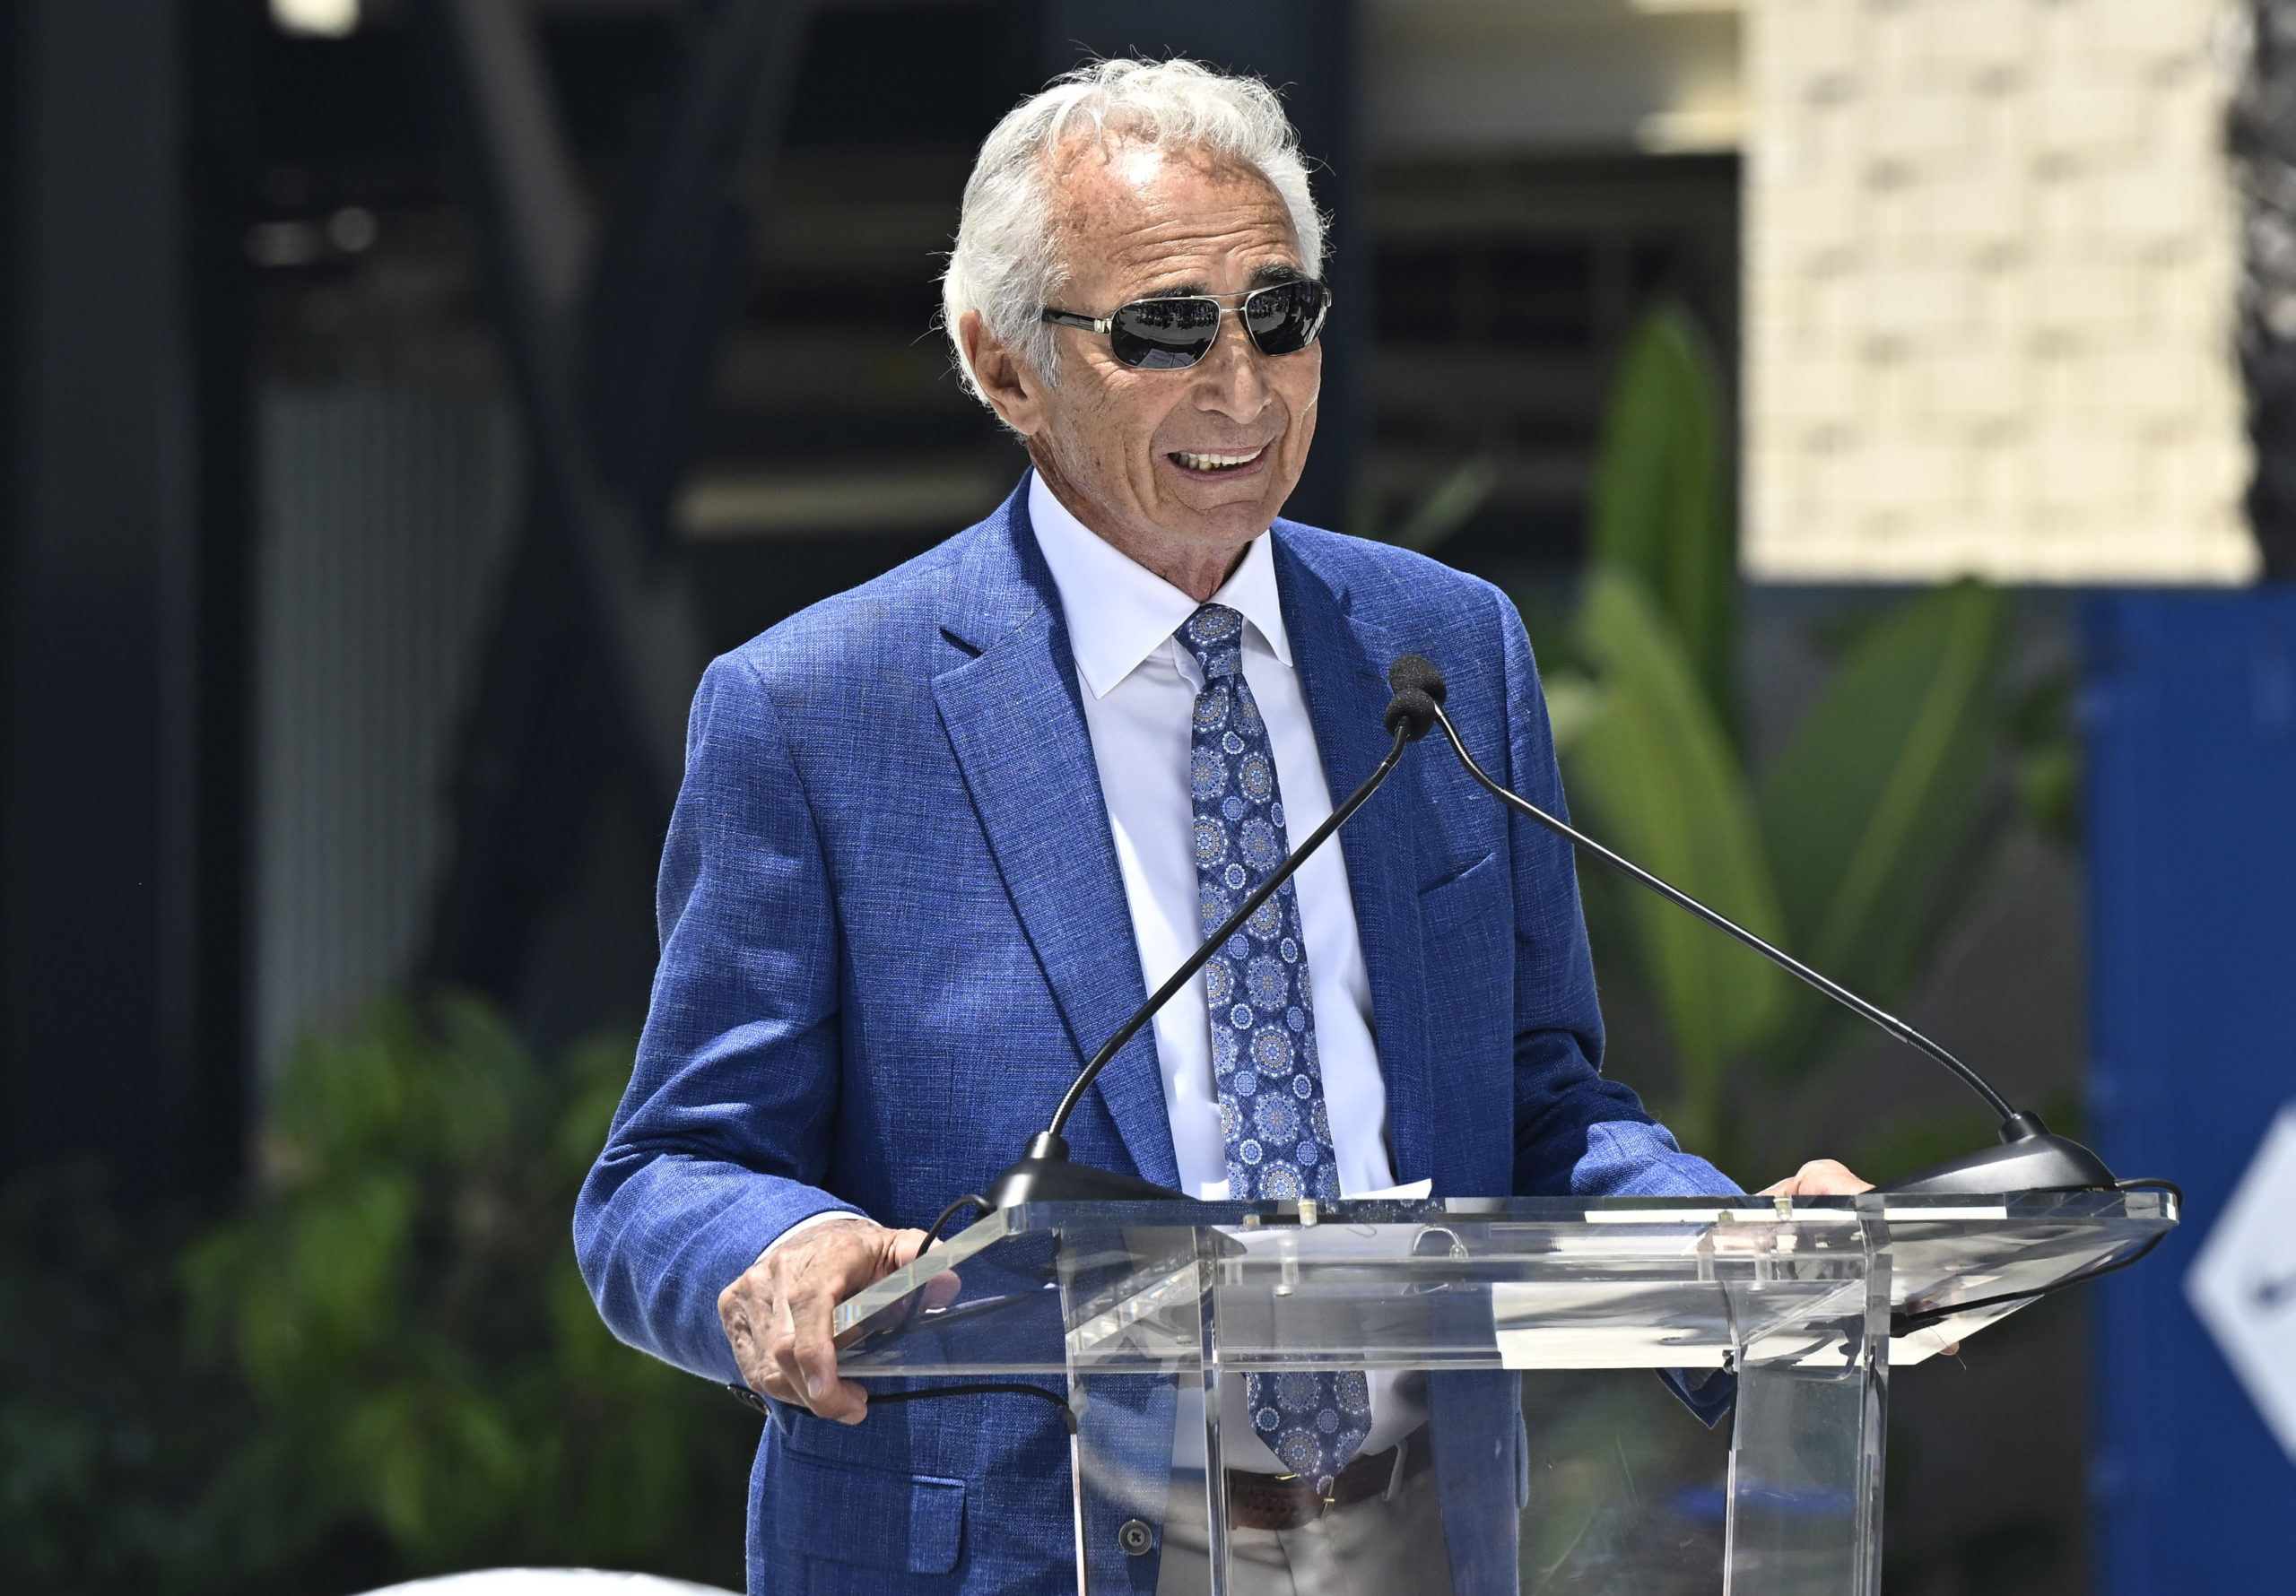 Dodgers to unveil Sandy Koufax statue on June 18